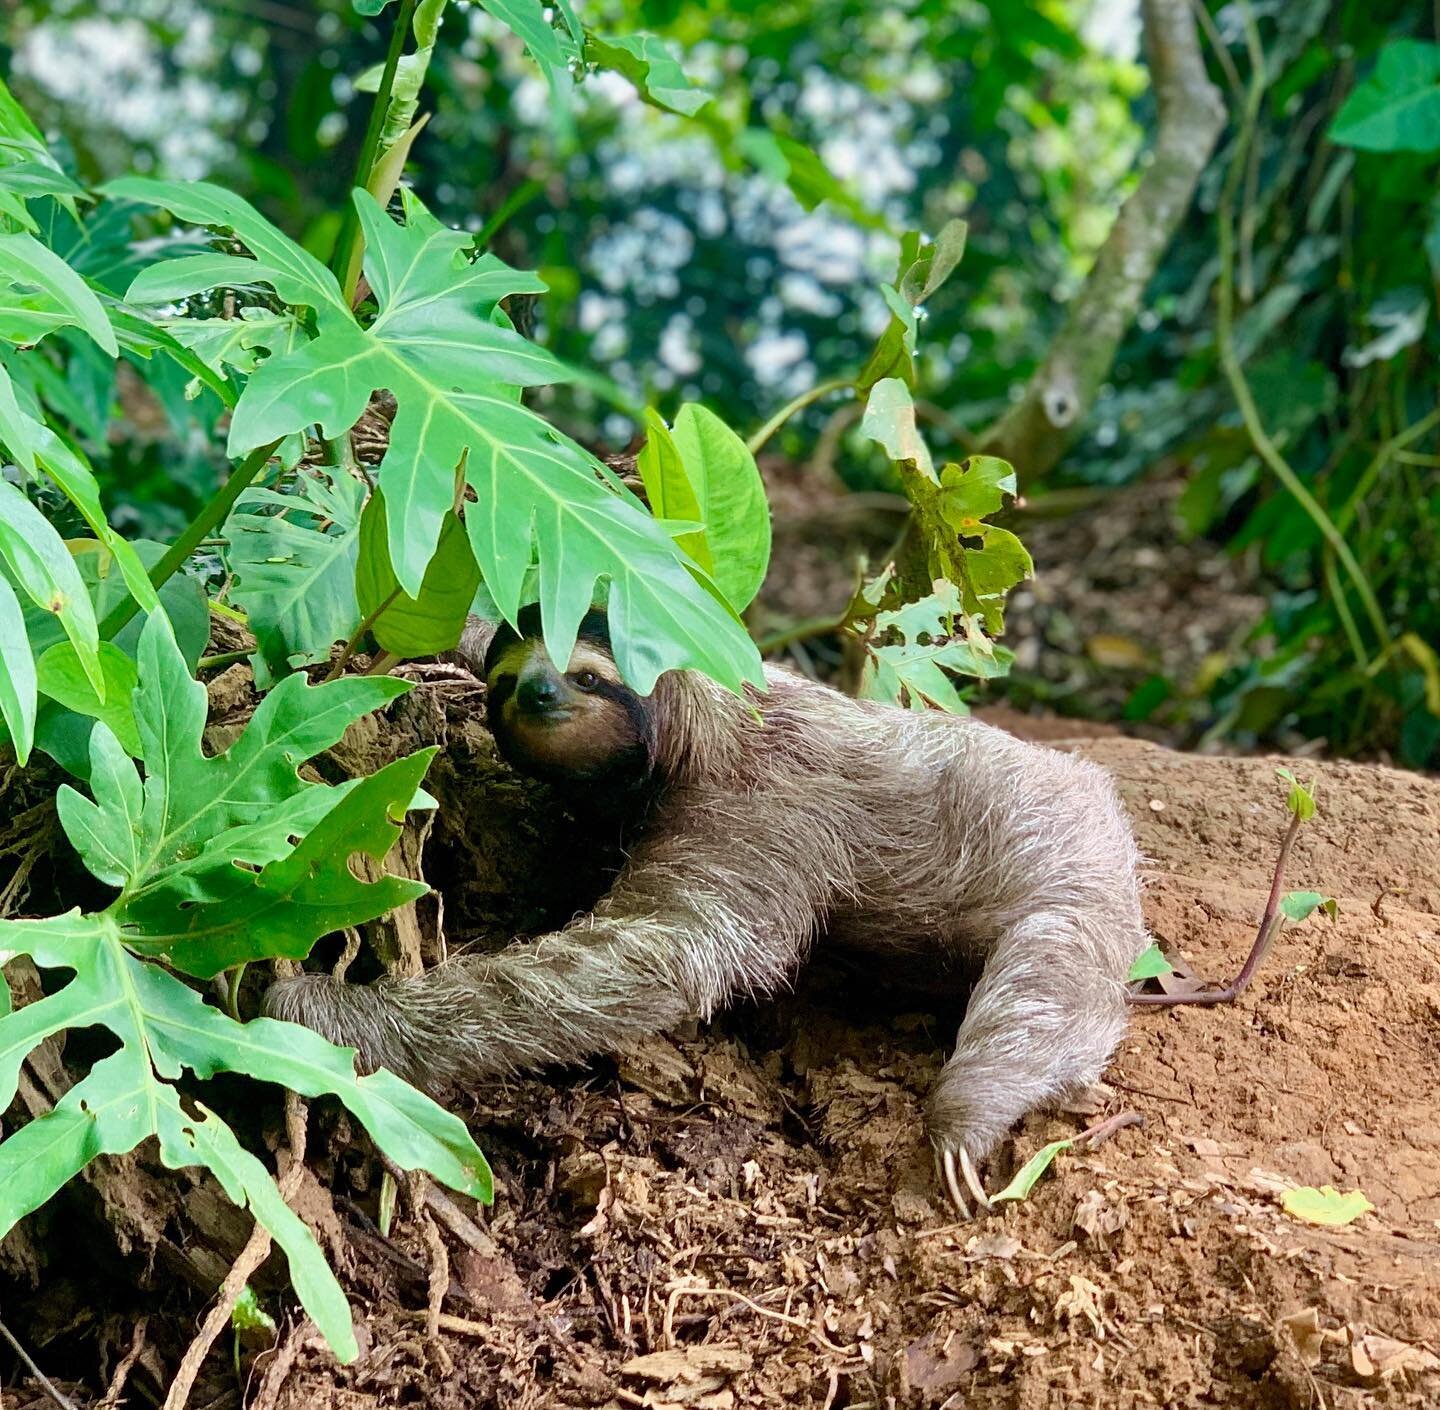 Beautiful photo taken by a friend who has made a few awesome trips to Costa Rica. She spotted this three fingered sloth in Punta Uva. Sloths spend most of their time in the trees. Do you know why they might be on the ground? Post your guesses in the 